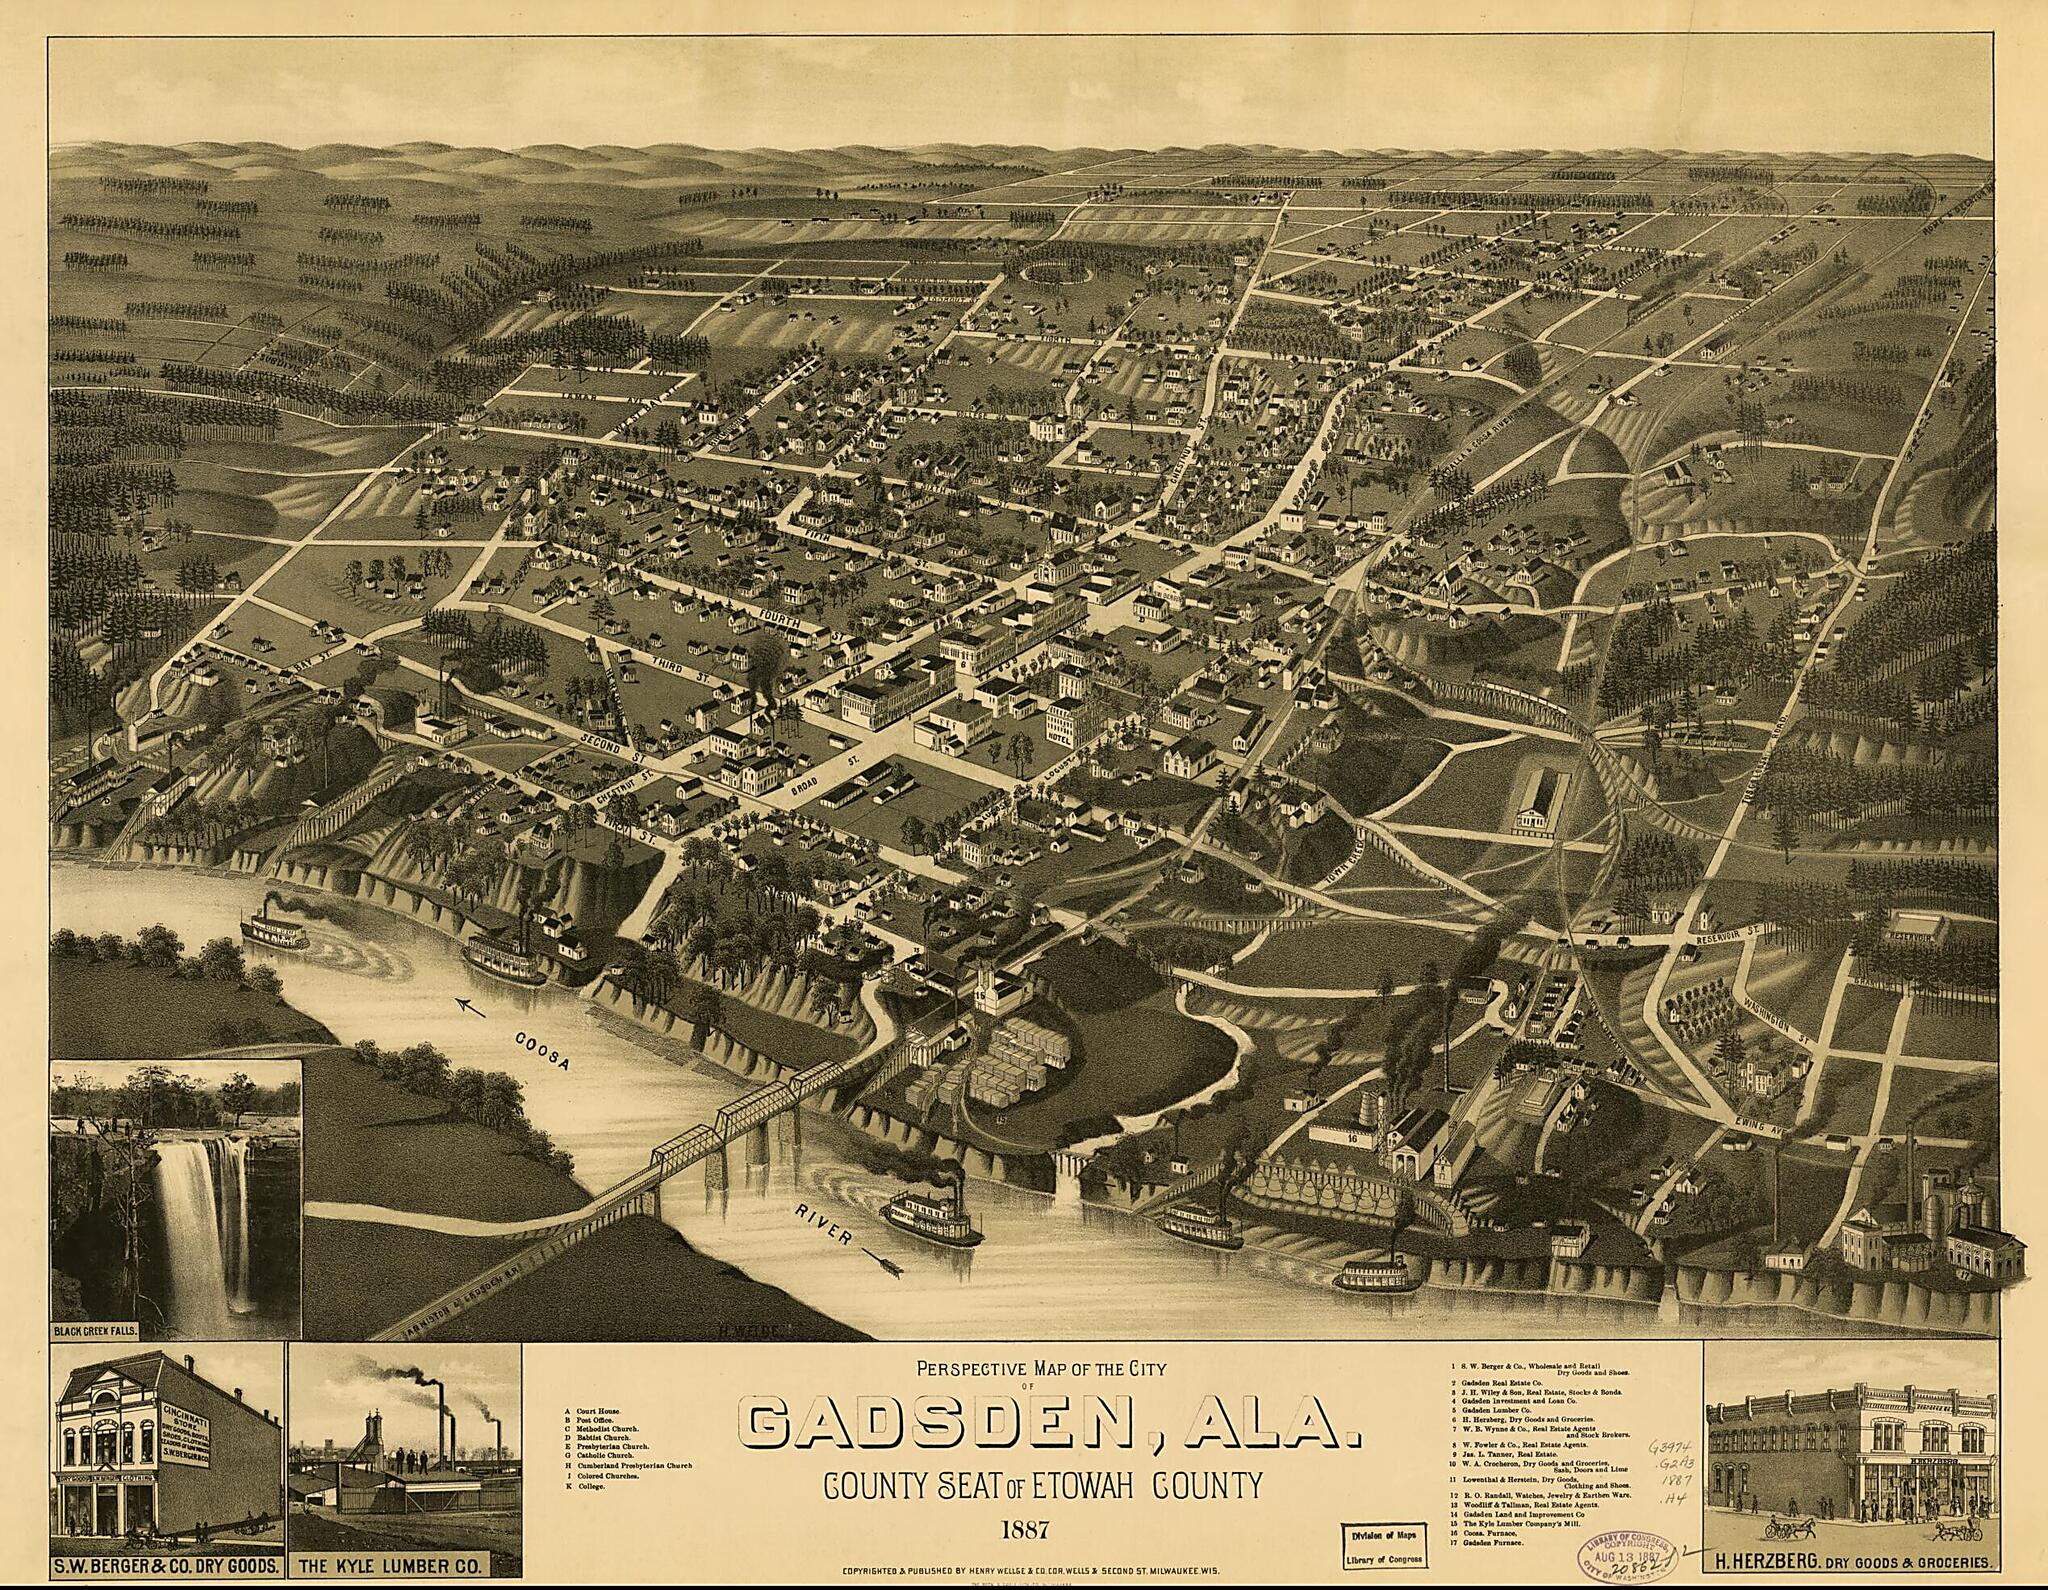 This old map of Perspective Map of the City of Gadsden,Alabama County Seat of Etowah County from 1887 was created by  Beck &amp; Pauli,  Henry Wellge &amp; Co, H. (Henry) Wellge in 1887